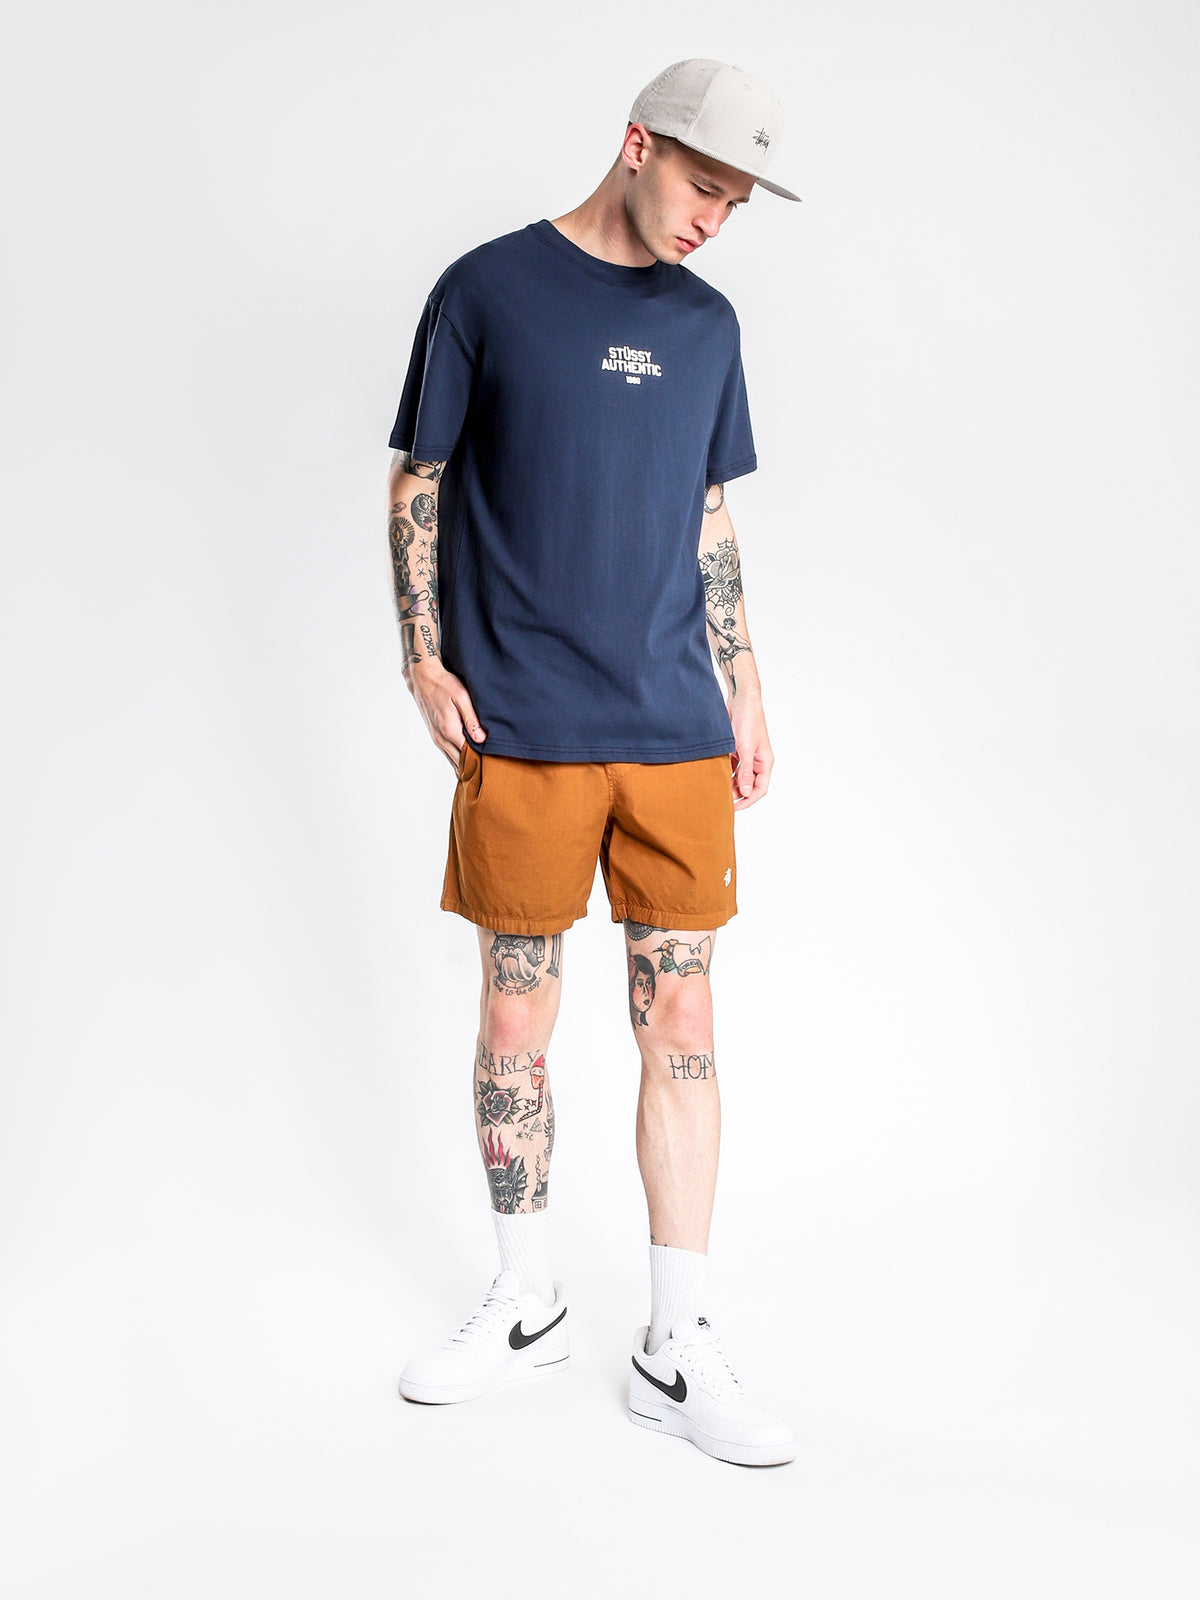 Authentic Short Sleeve T-Shirt in Navy